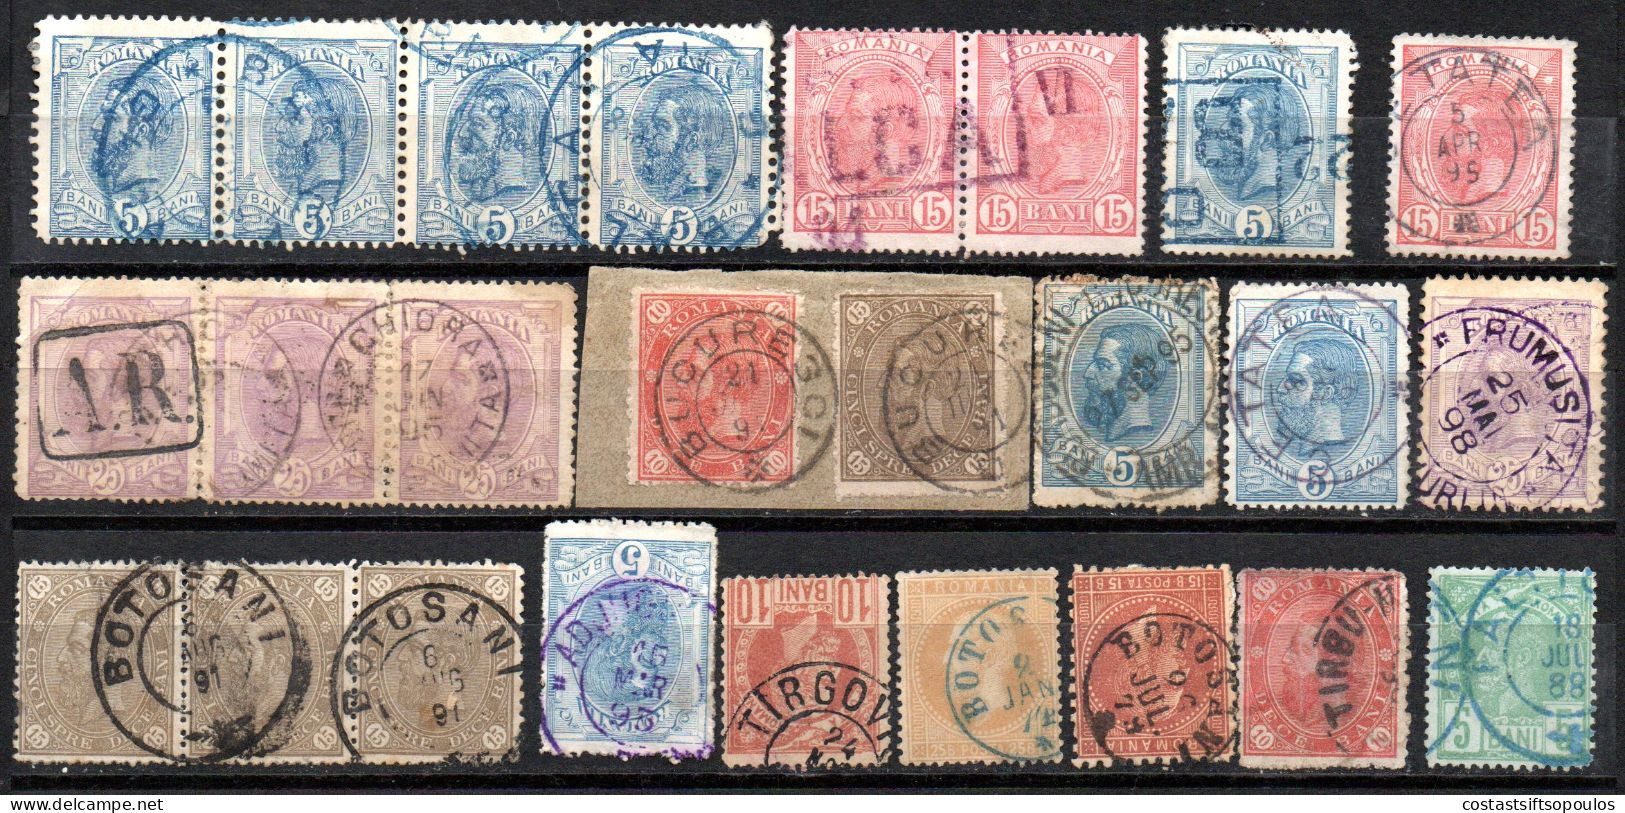 2670. ROMANIA CLASSIC STAMPS LOT, SOME INTERESTING POSTMARKS,FEW LIGHT FAULTS. - Usado